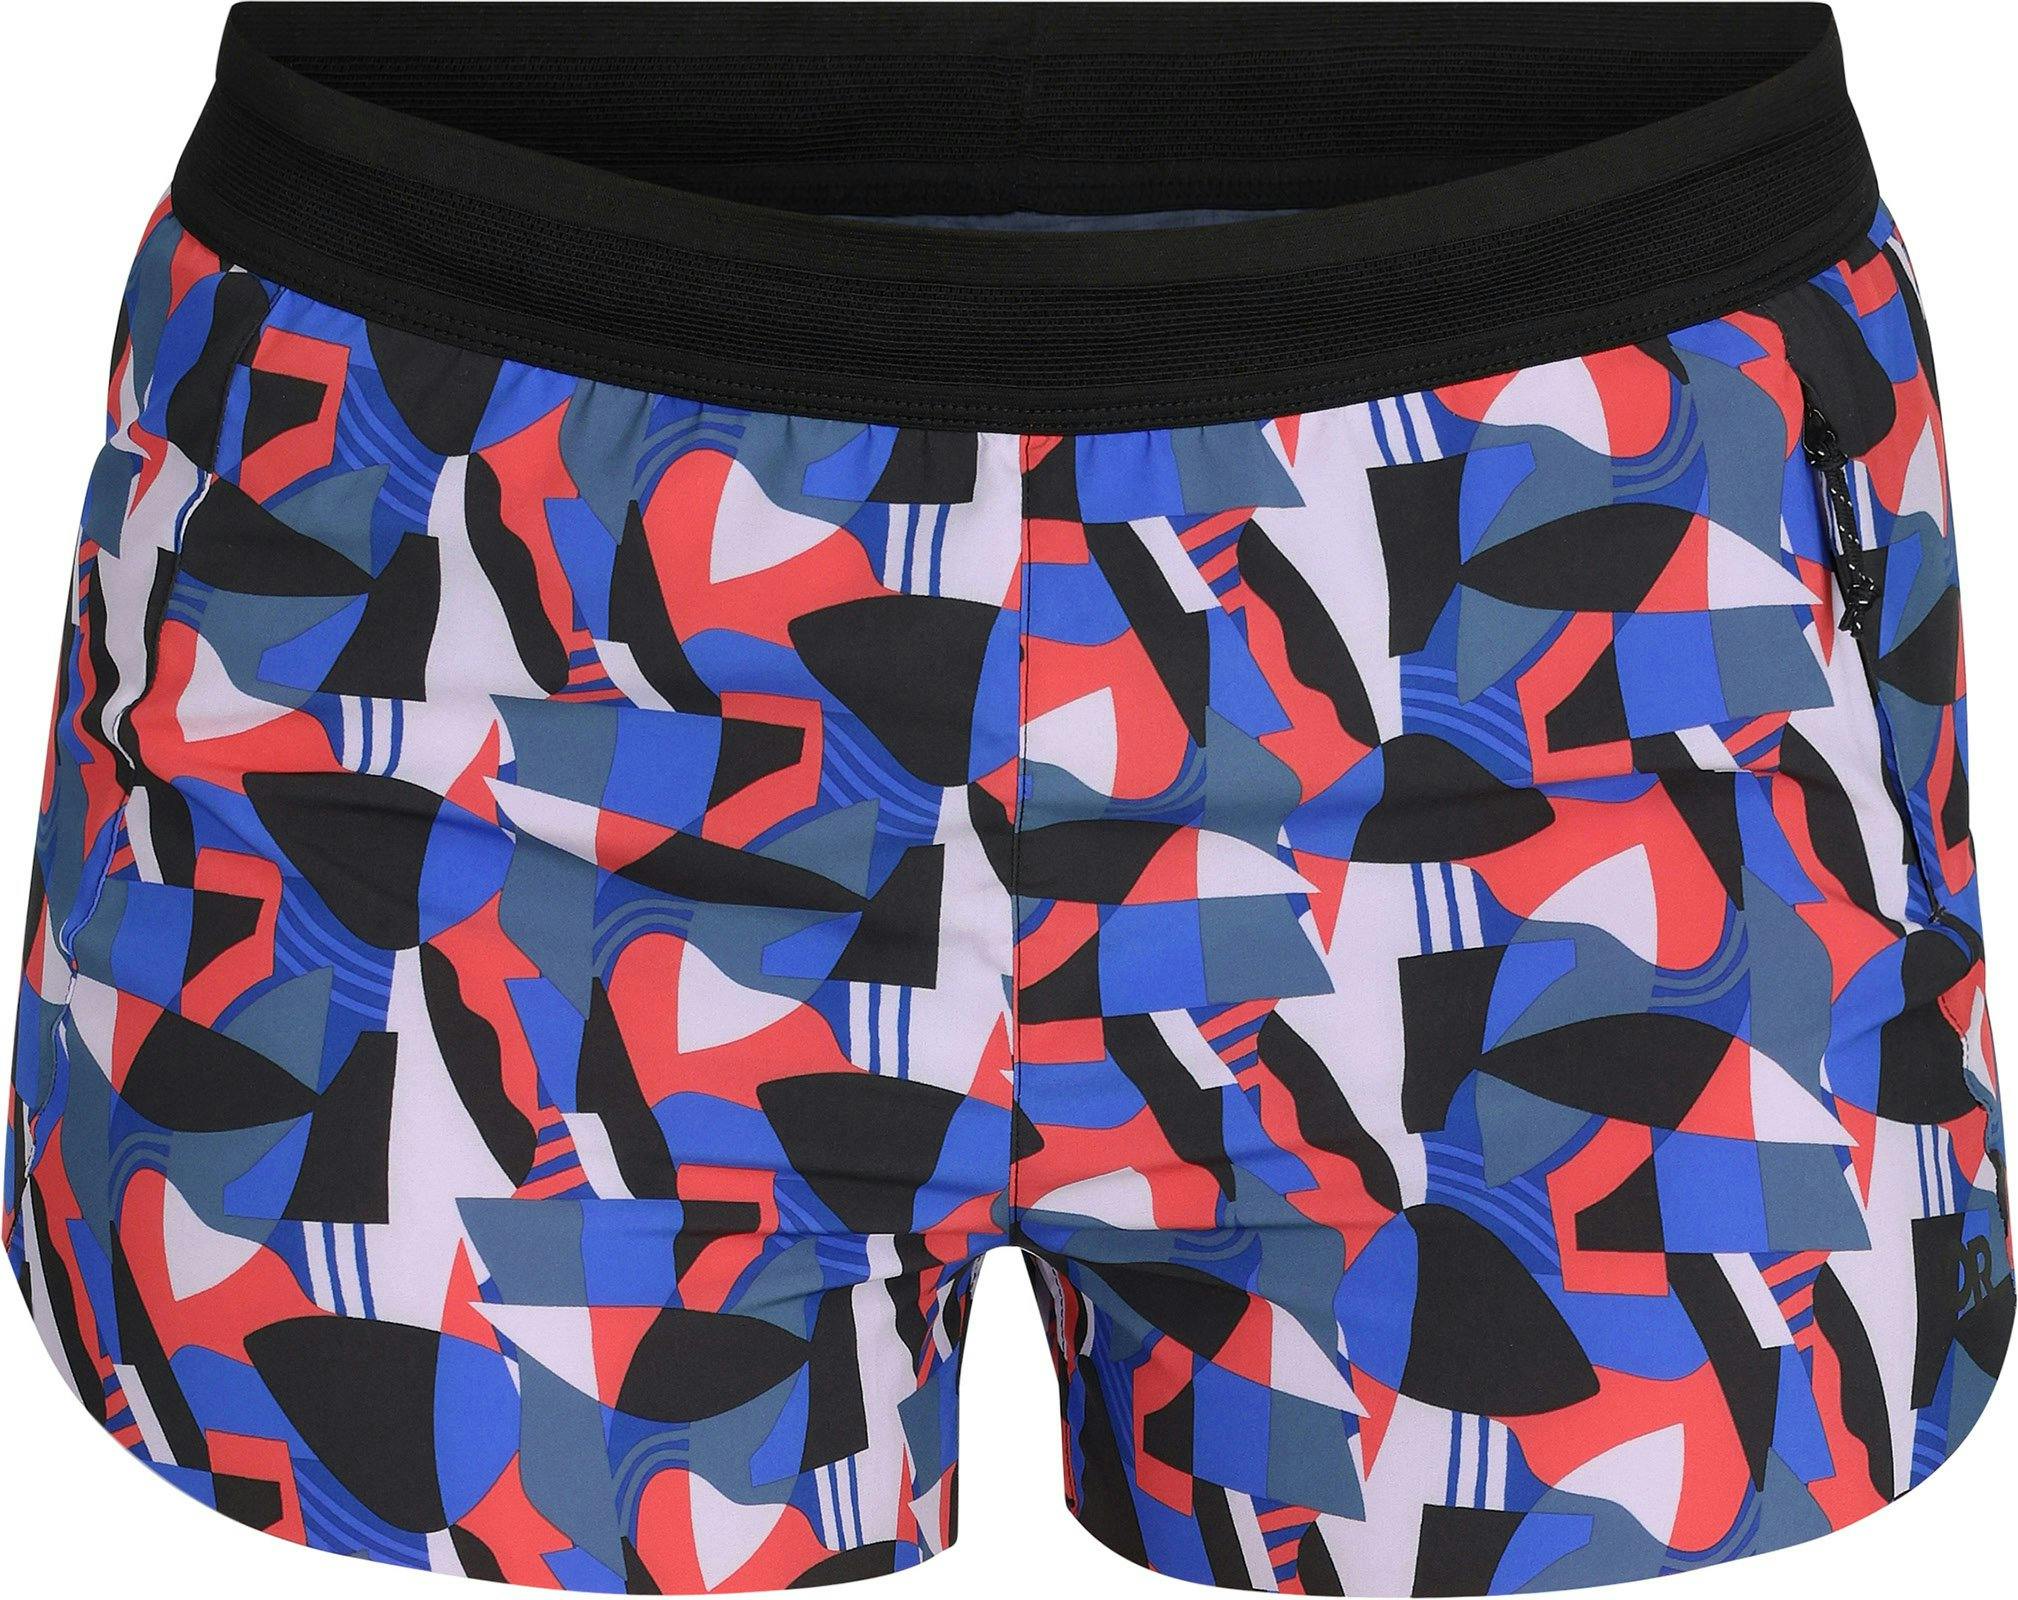 Product image for Swift Lite Printed Shorts 2.5In - Women's